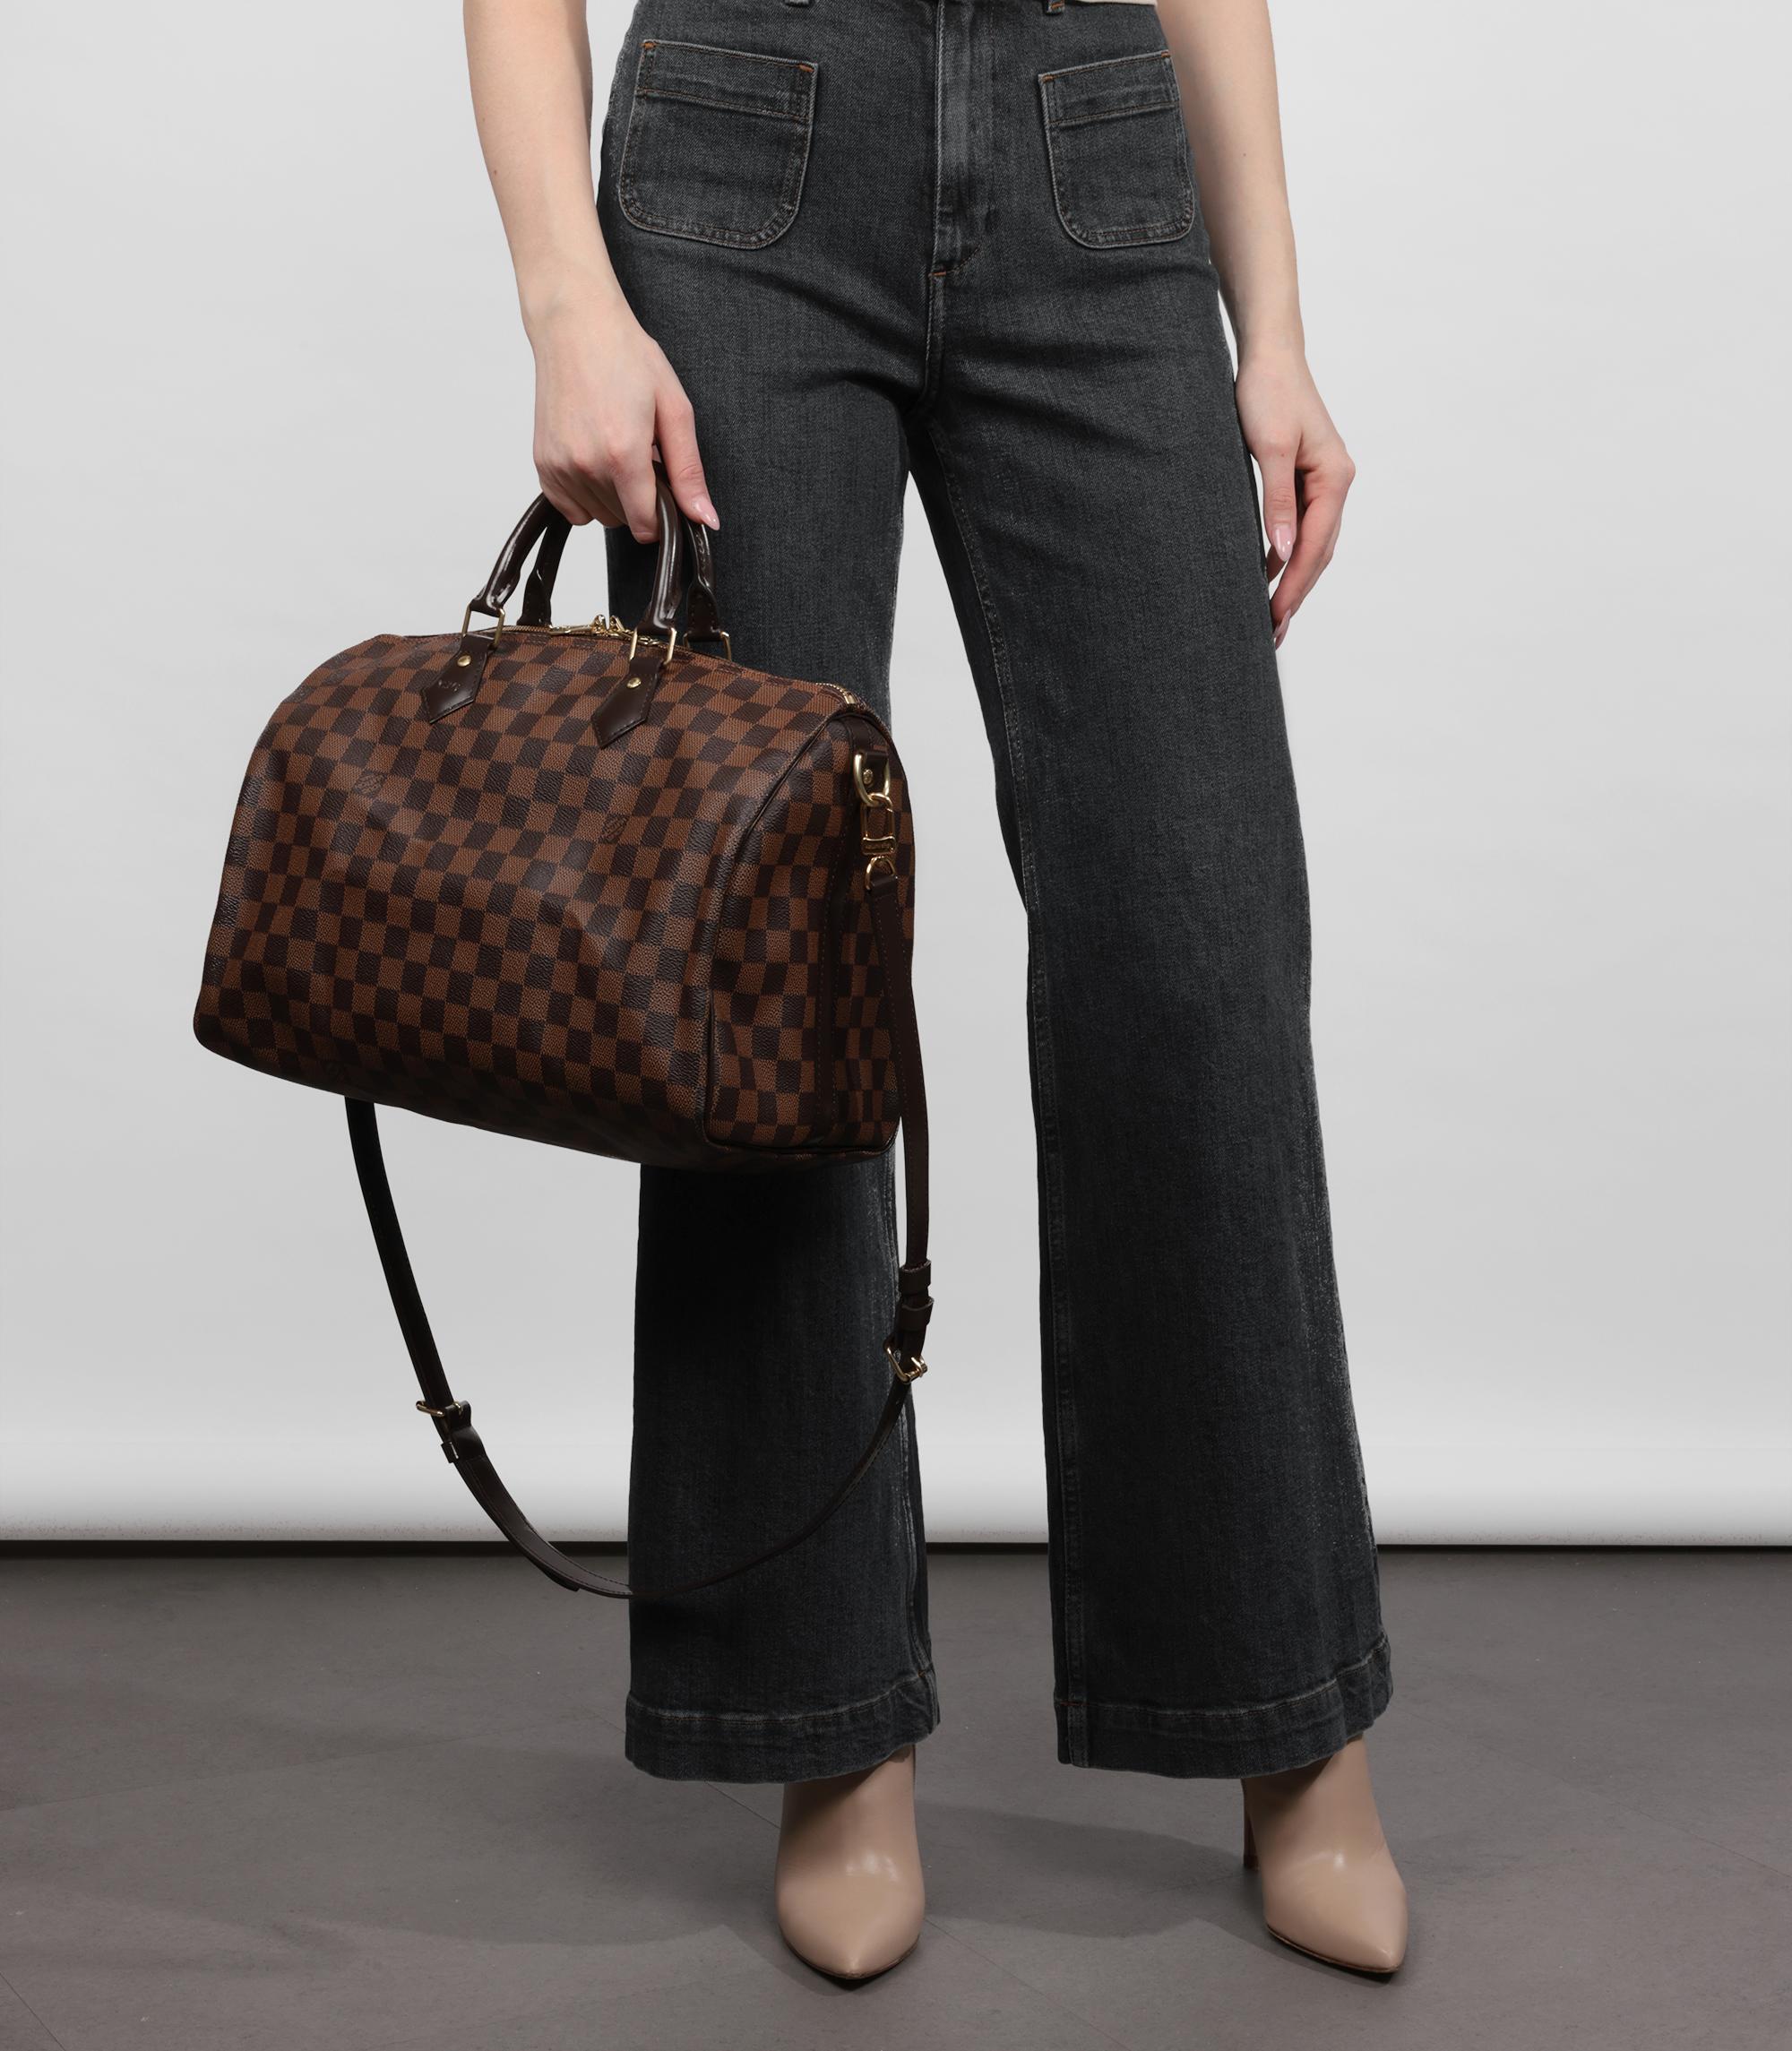 Louis Vuitton Damier Ebene Coated Canvas & Brown Calfskin Leather Speedy 35cm Bandoulière

Brand- Louis Vuitton
Model- Speedy 35cm Bandoulière
Product Type- Crossbody, Shoulder, Tote
Serial Number- CT****
Age- Circa 2016
Accompanied By- Shoulder